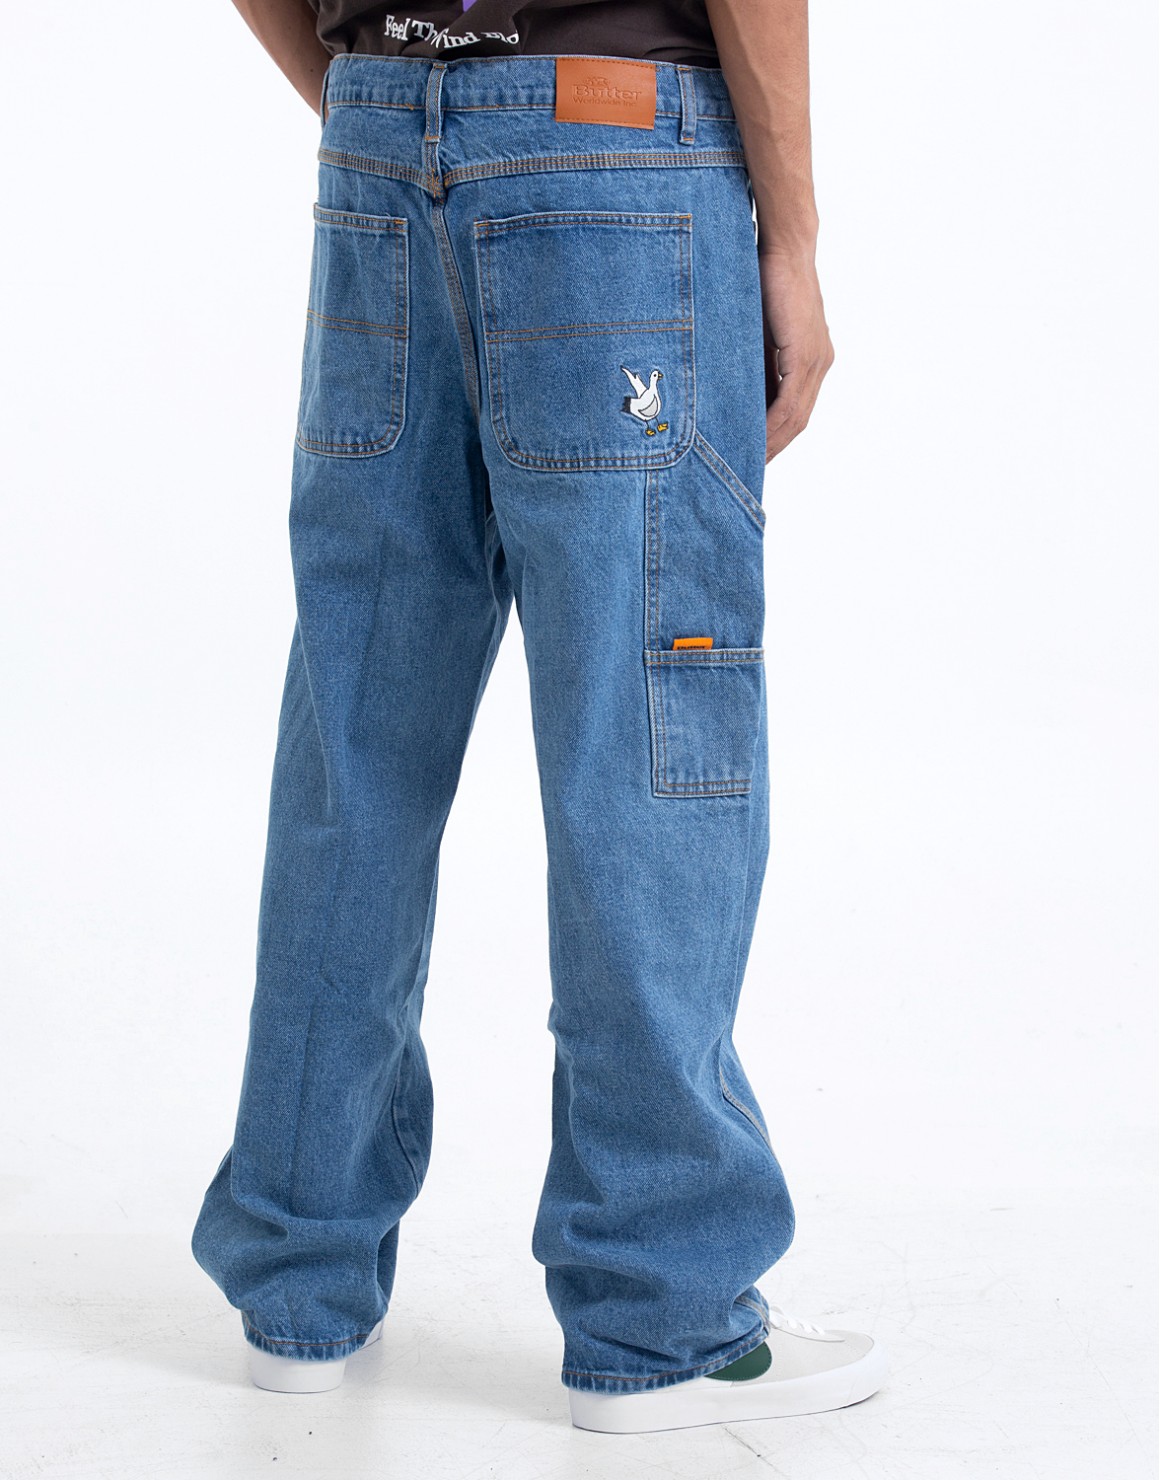 Gullwing Denim Pant Relaxed